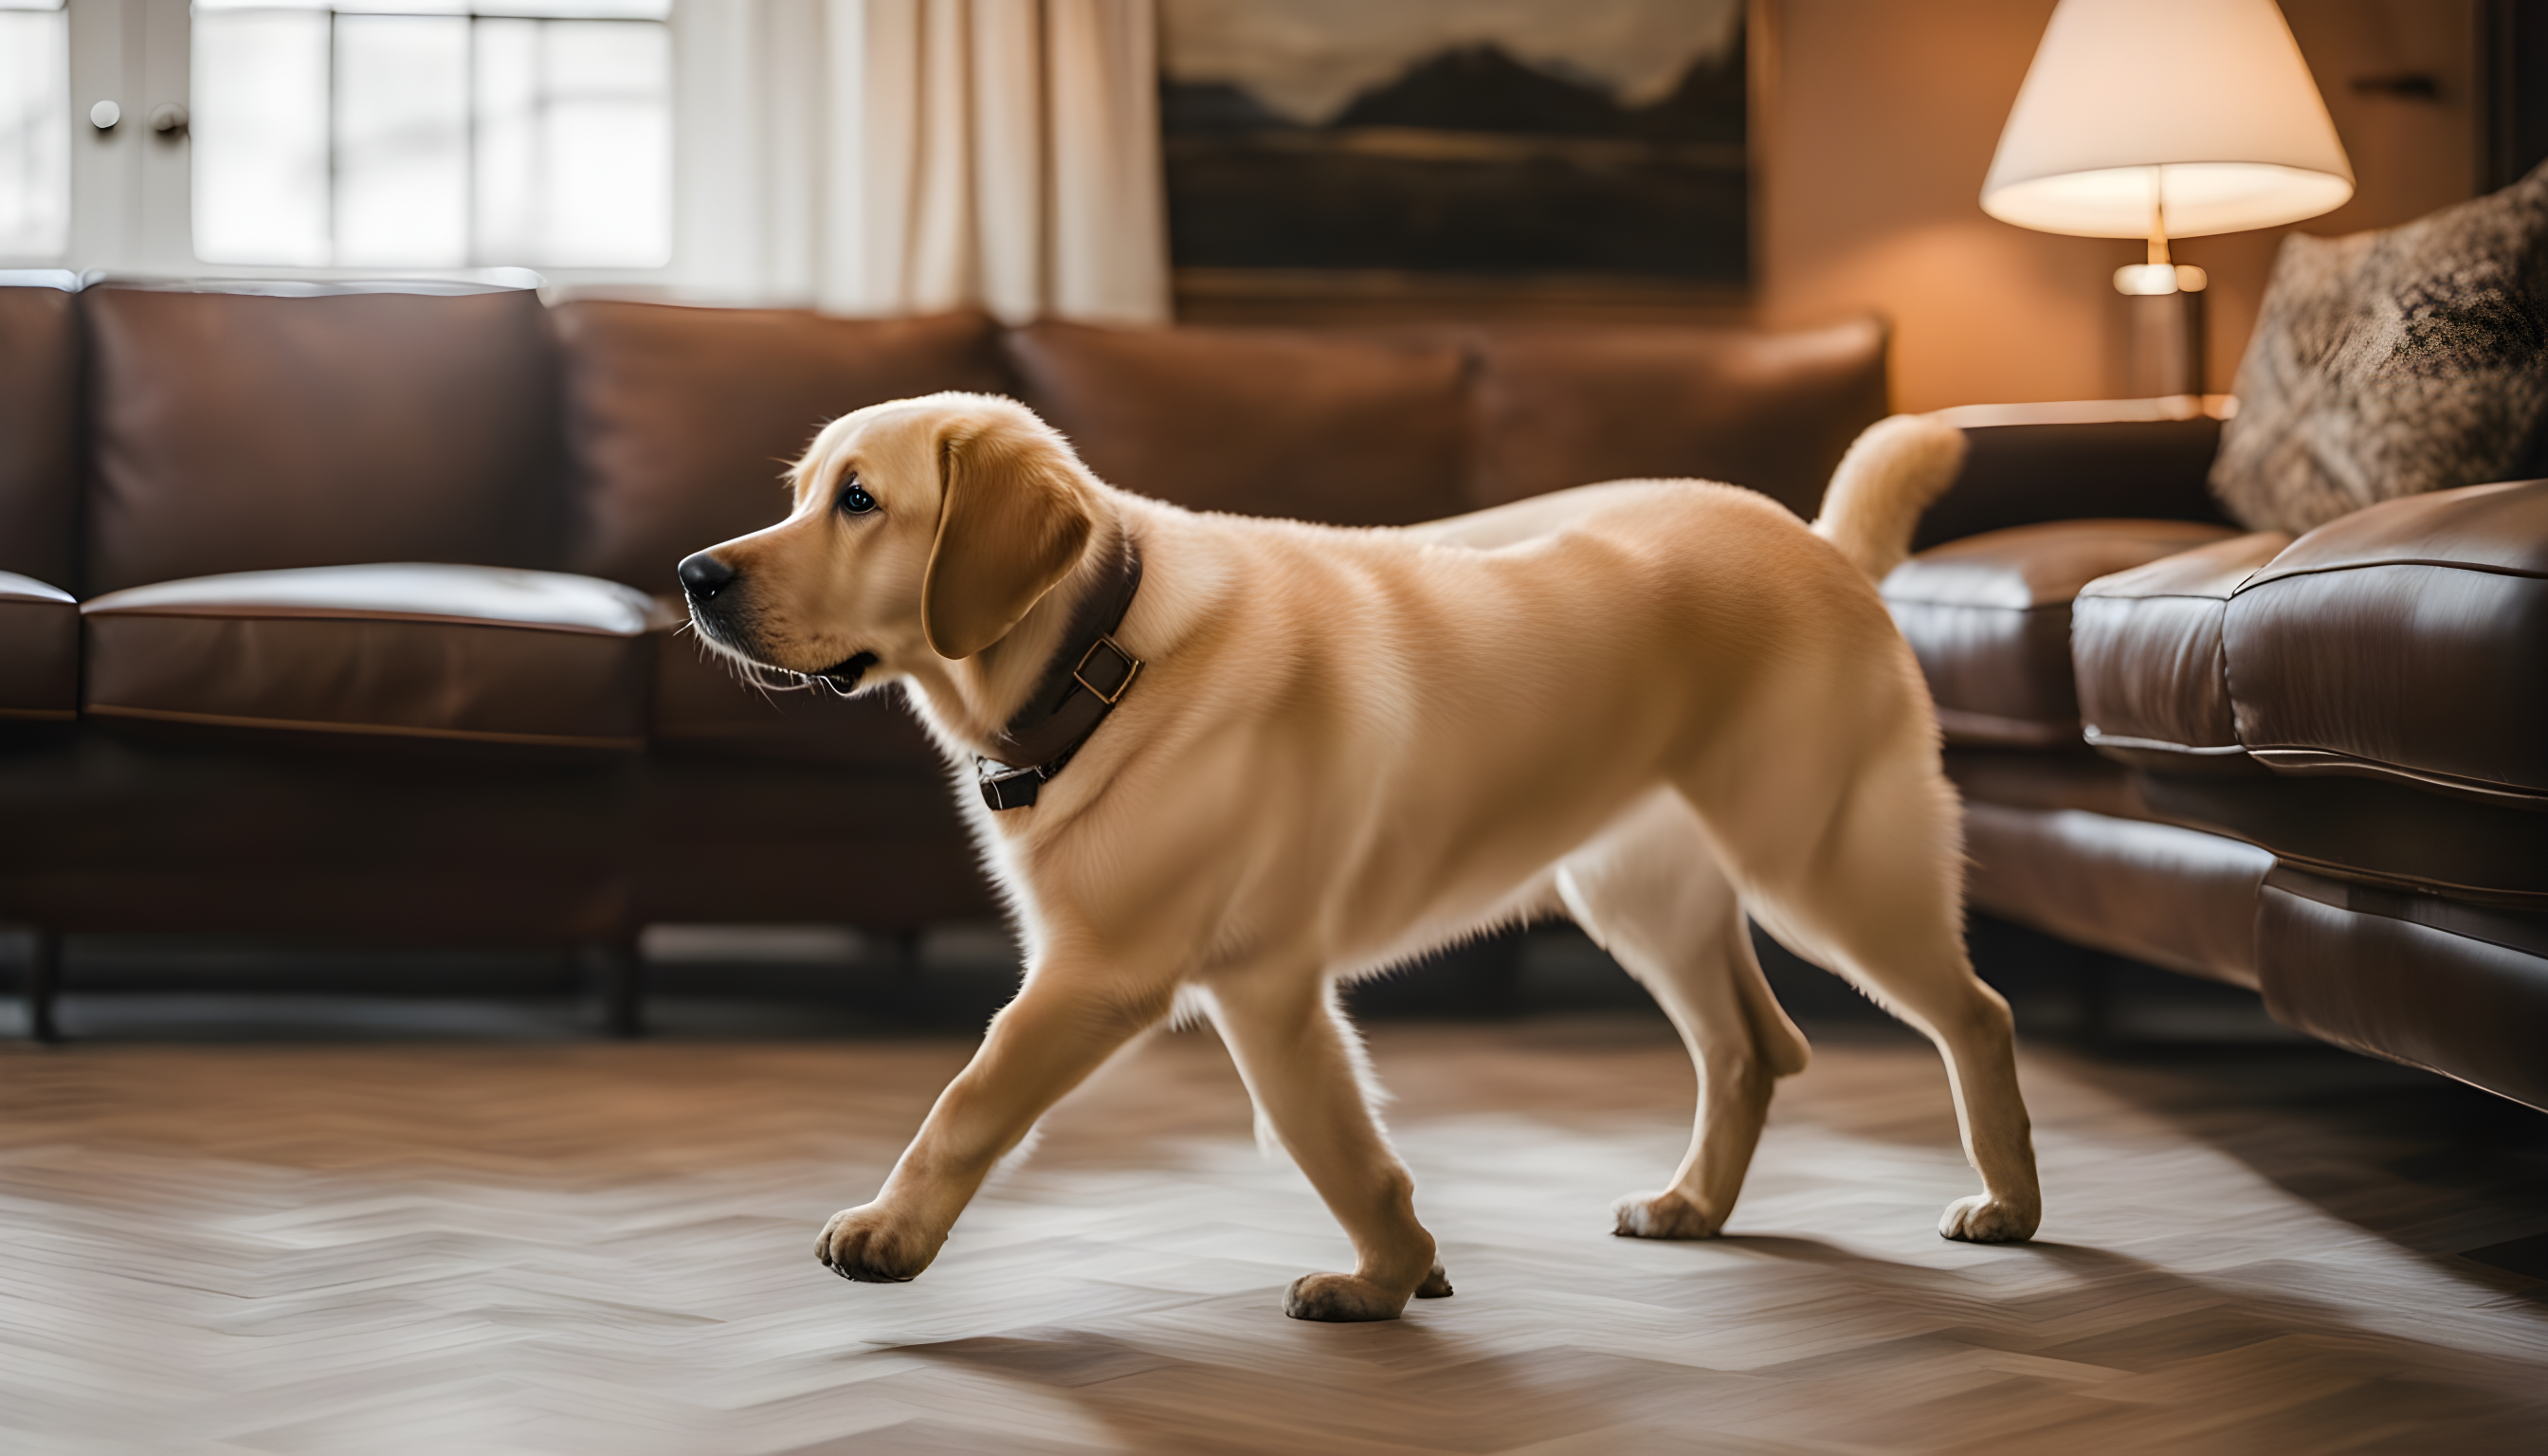 British Lab walking away from a couch, leaving a trail of fur.